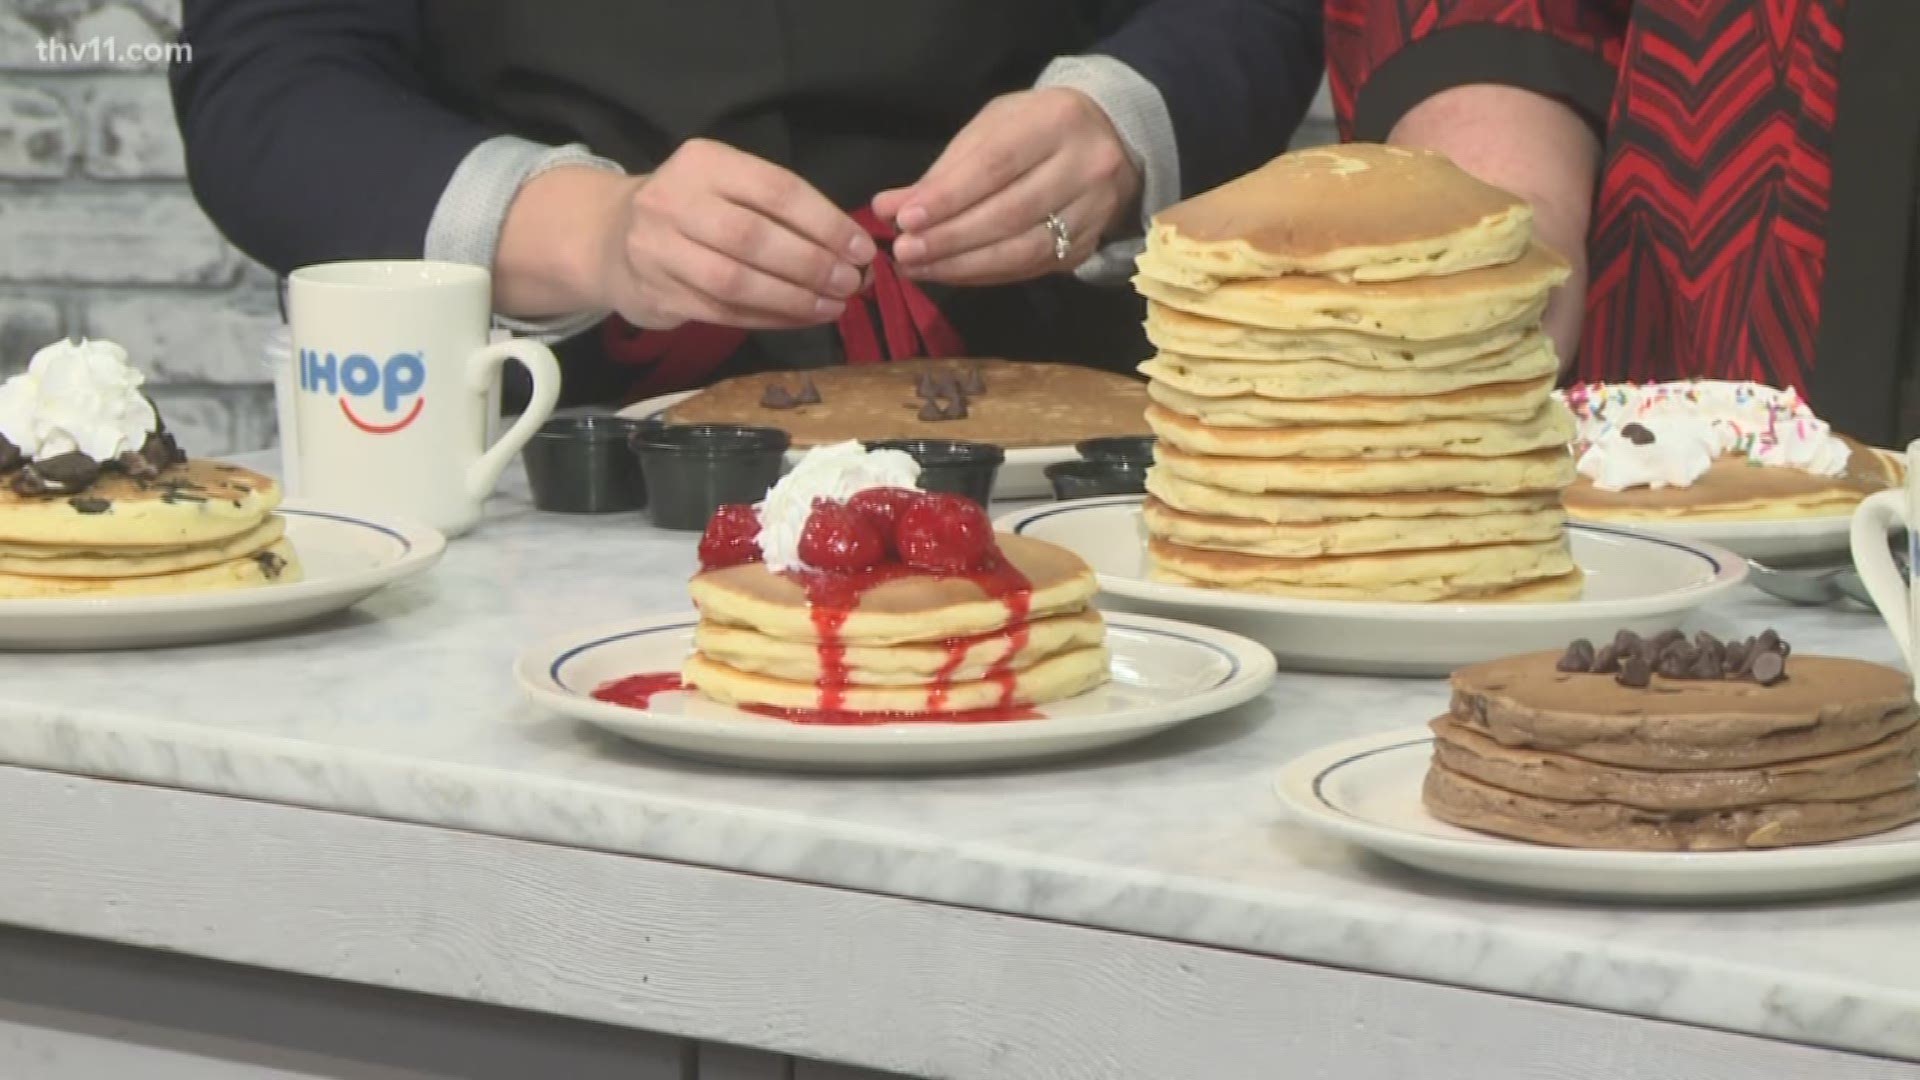 IHOP is offering a free short stack until 7 p.m. today. Donations at the event benefit Arkansas Children's Hospital.